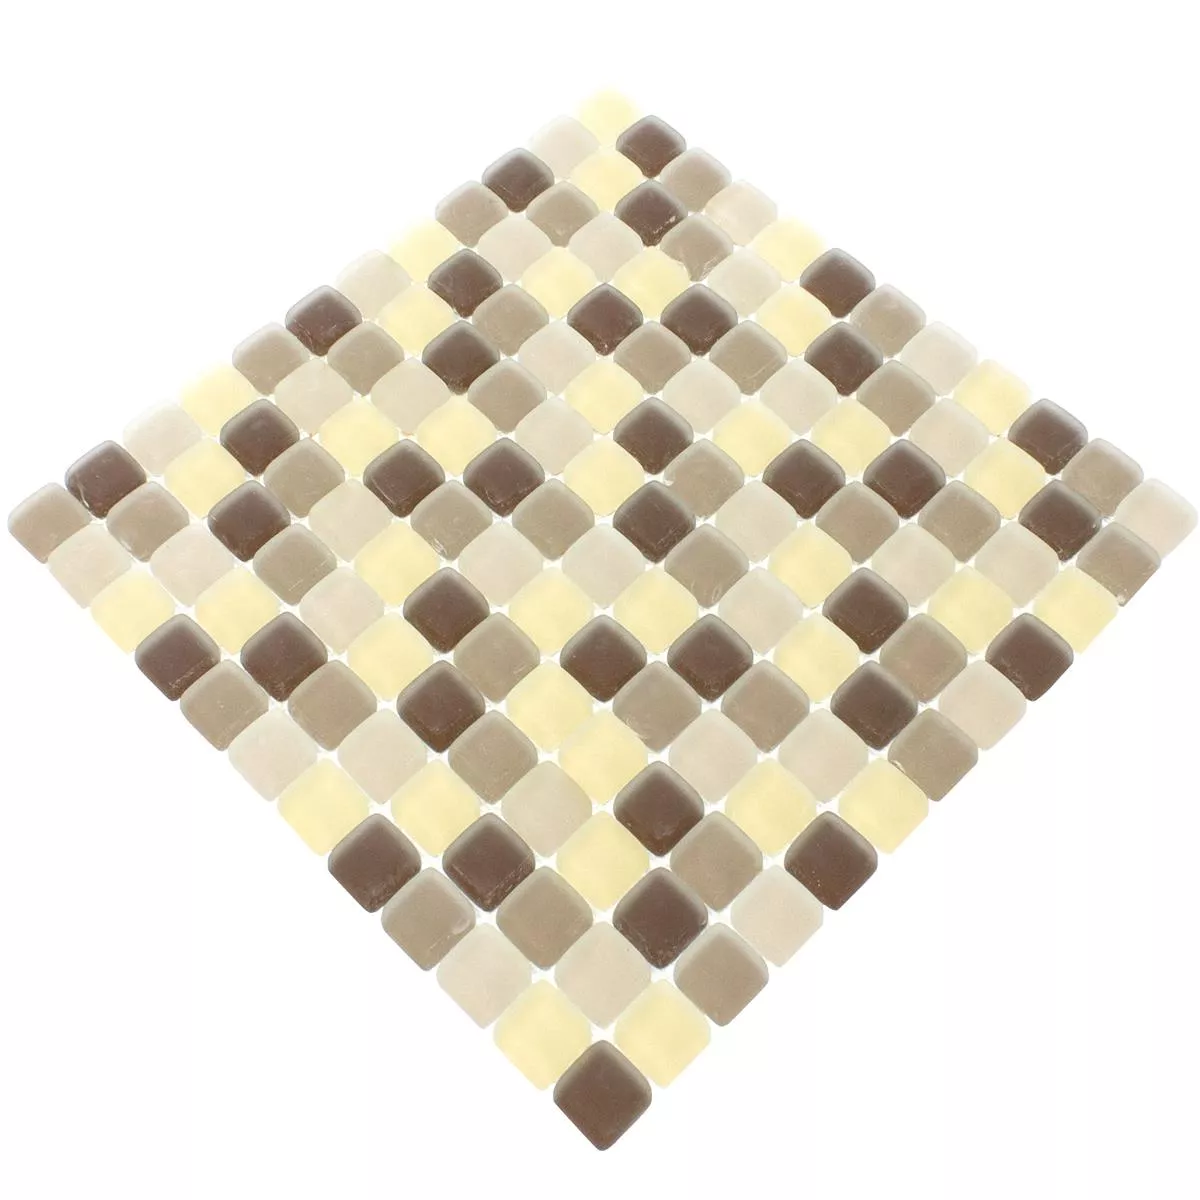 Sample Glass Mosaic Tiles Ponterio Frosted Brown Mix